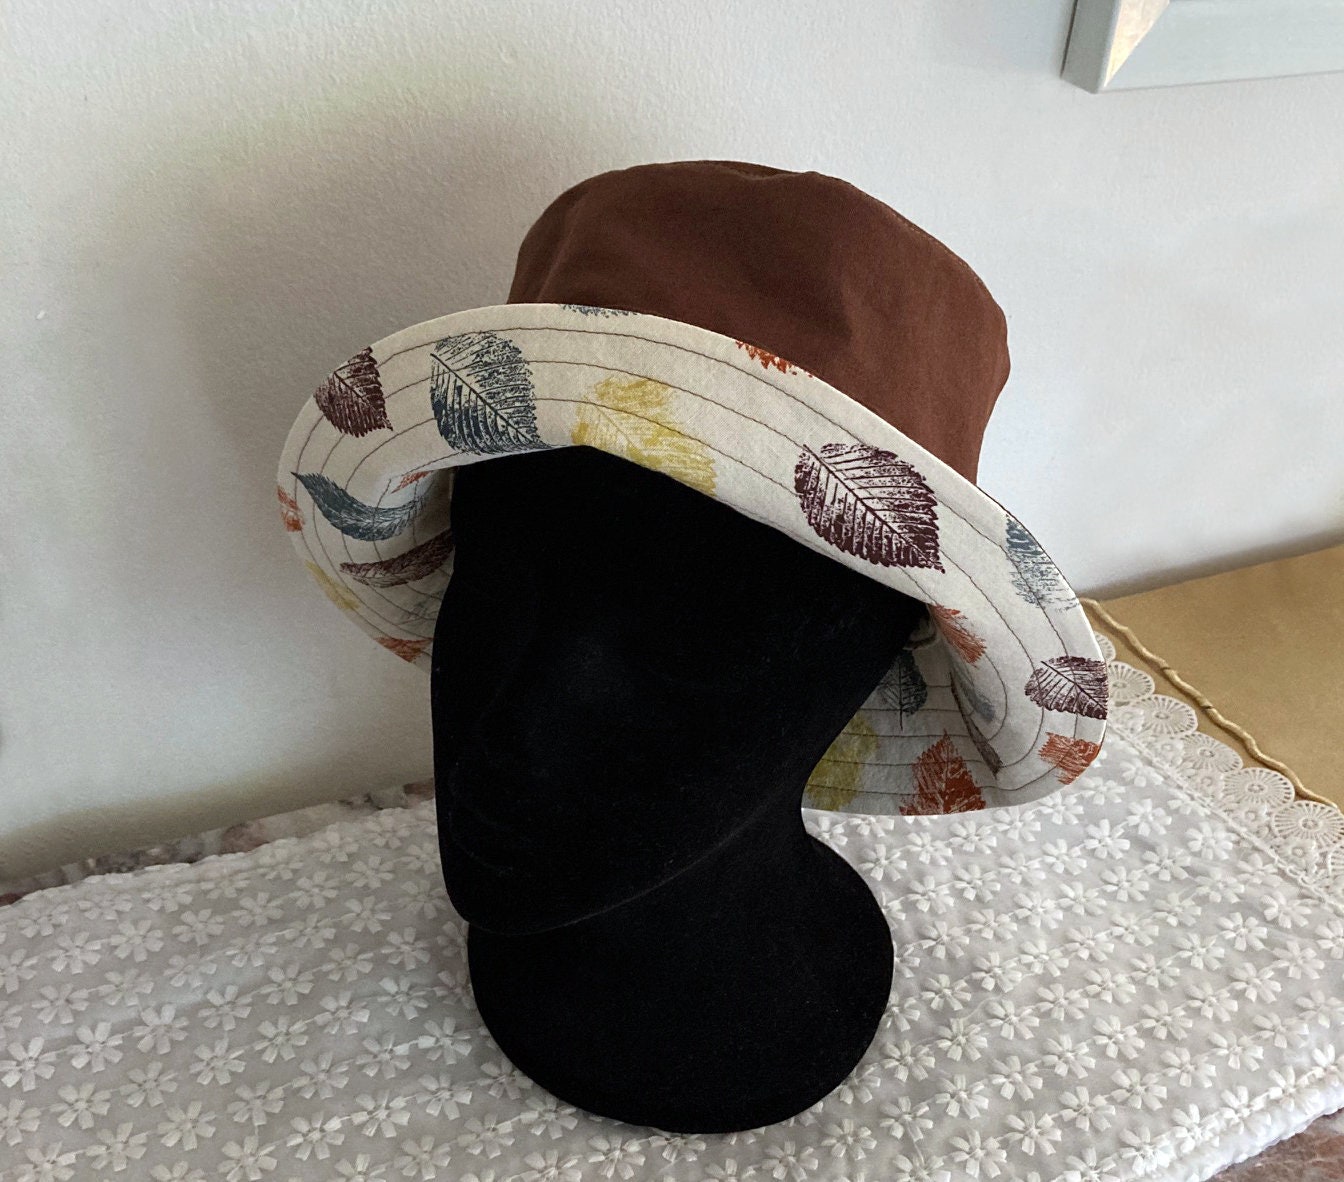 Lovely Bucket Hat , Reversible ,brown ,soil Color , Creamy Ivory,  Lightweight , Fall ,autumn Colors ,leaves ,cotton Fabric Made in USA 